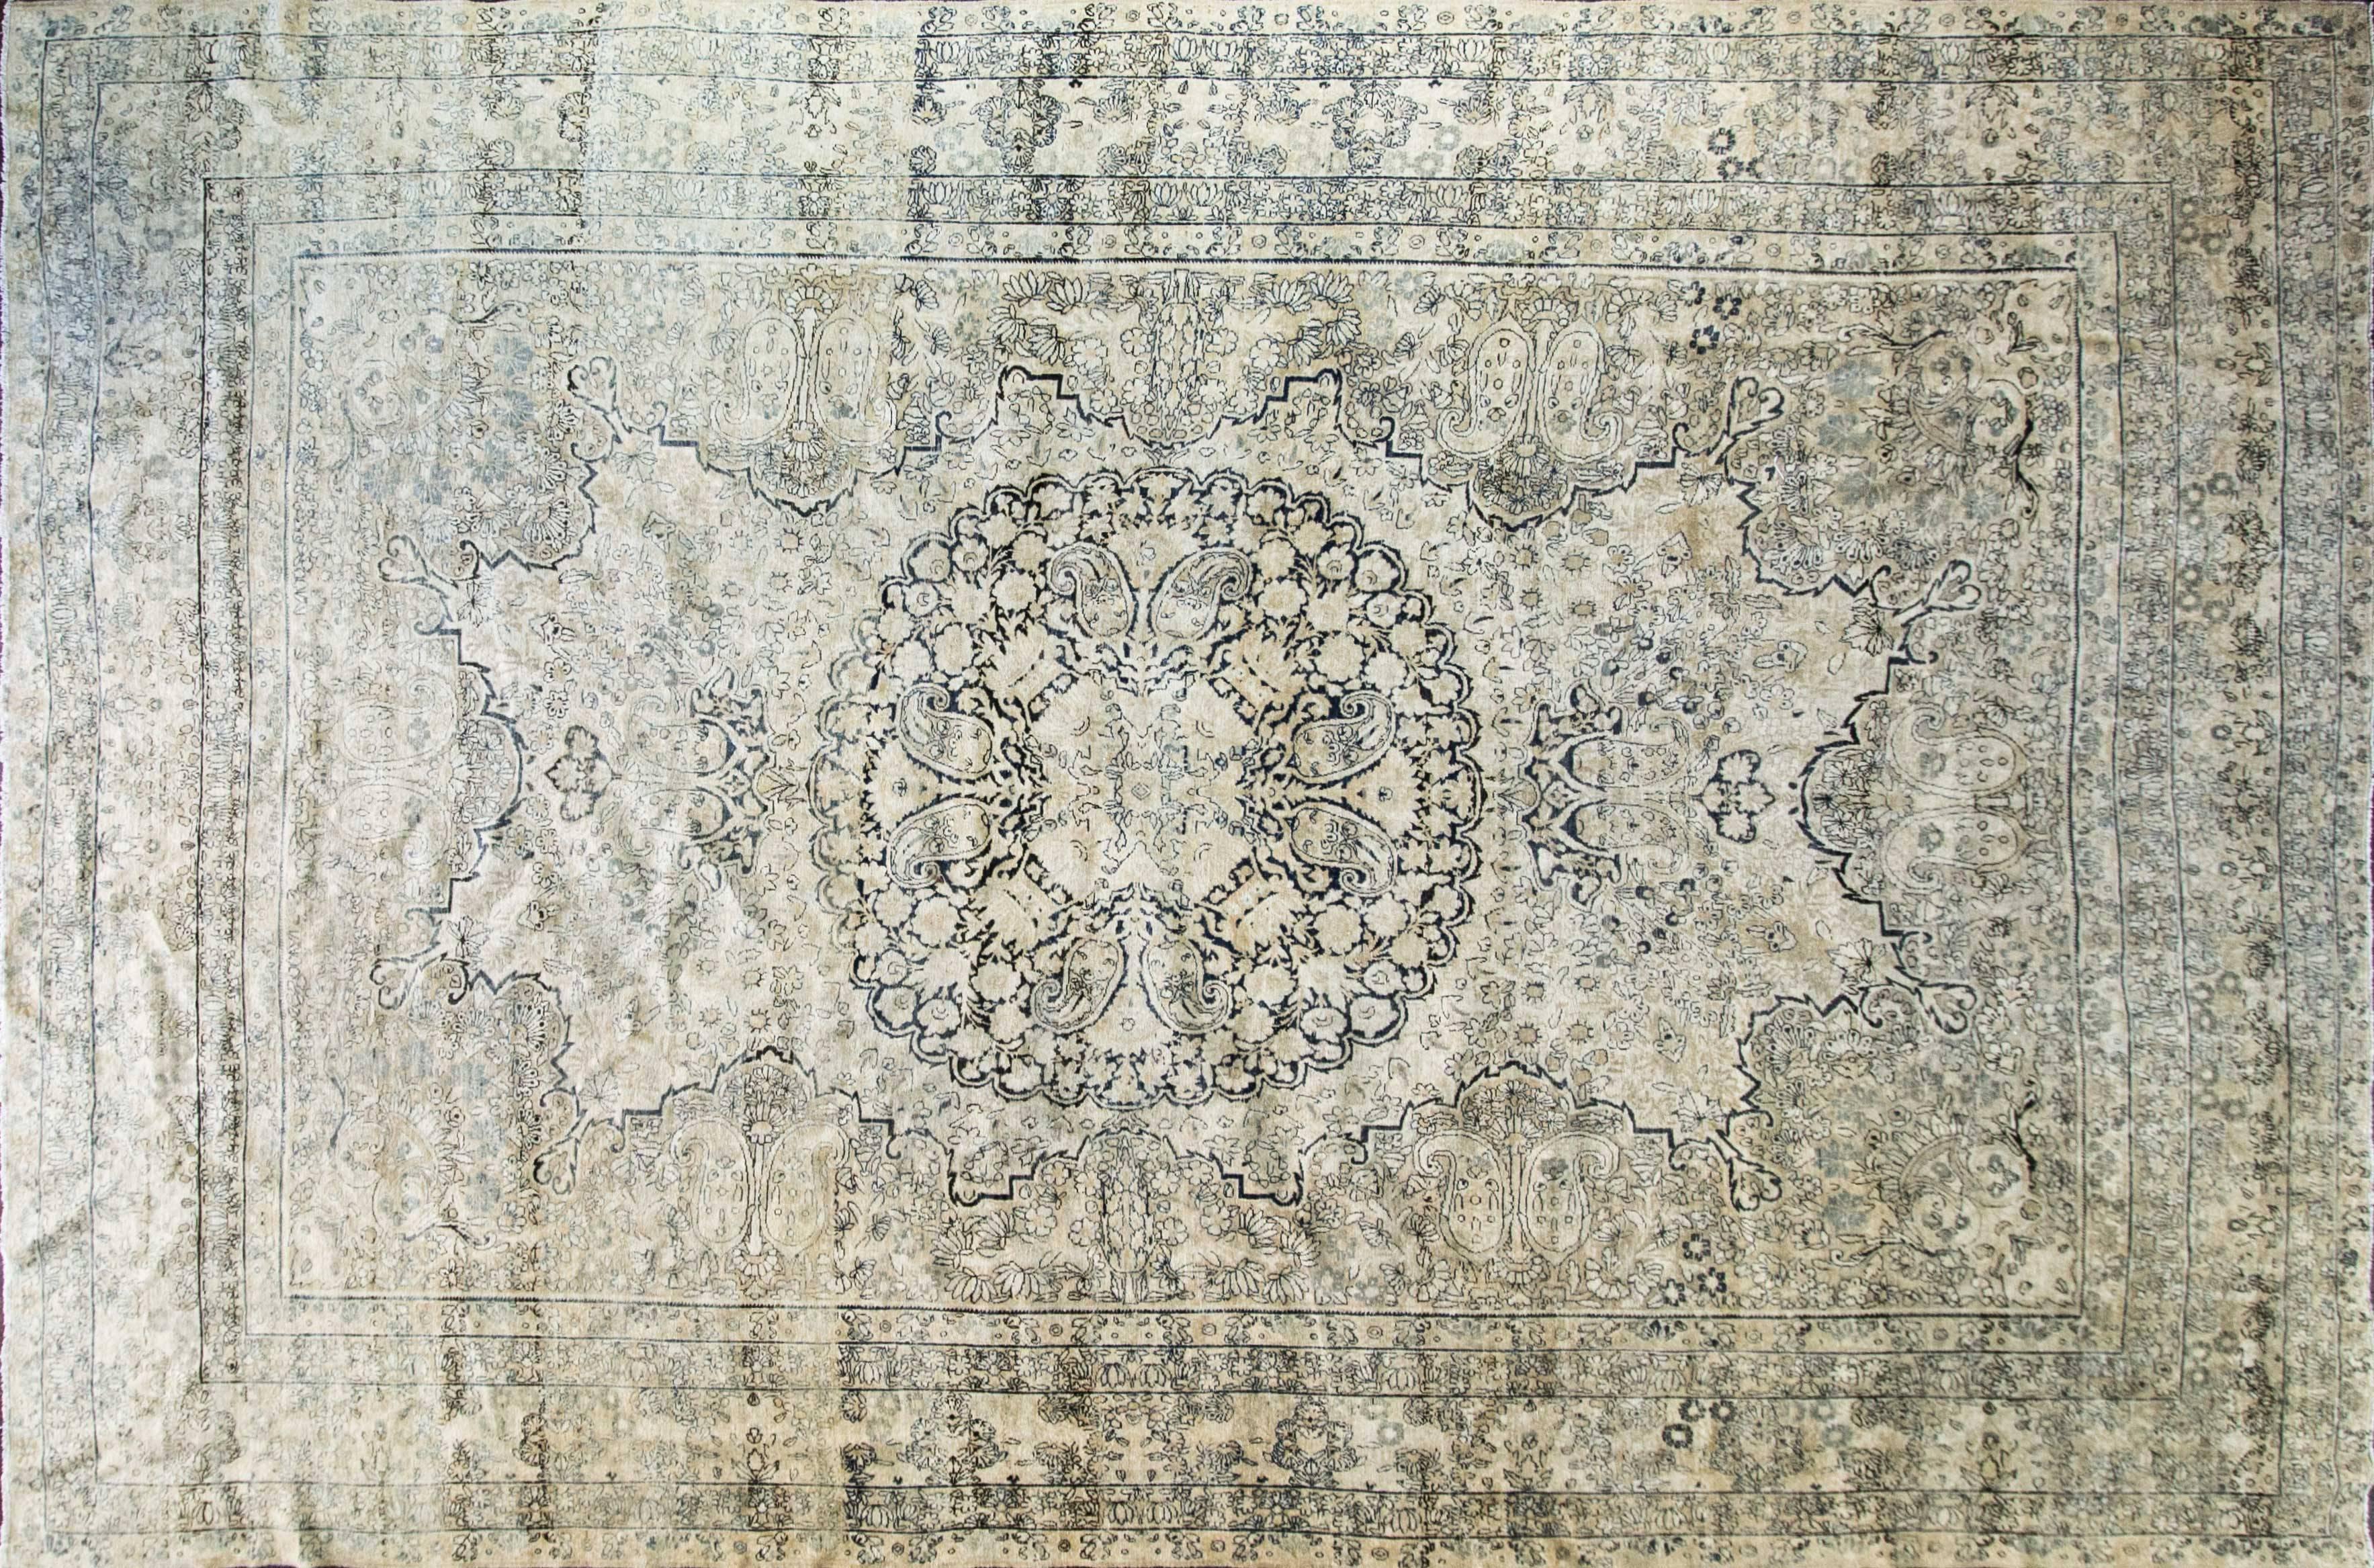 Kirman was a very important antique rug weaving centre dating from the Golden Age of Persian culture under the Safavid dynasty in the 16th century, on a par with Tabriz and Kashan in esteem. The color palette of Laver Kirman antique Persian rugs is